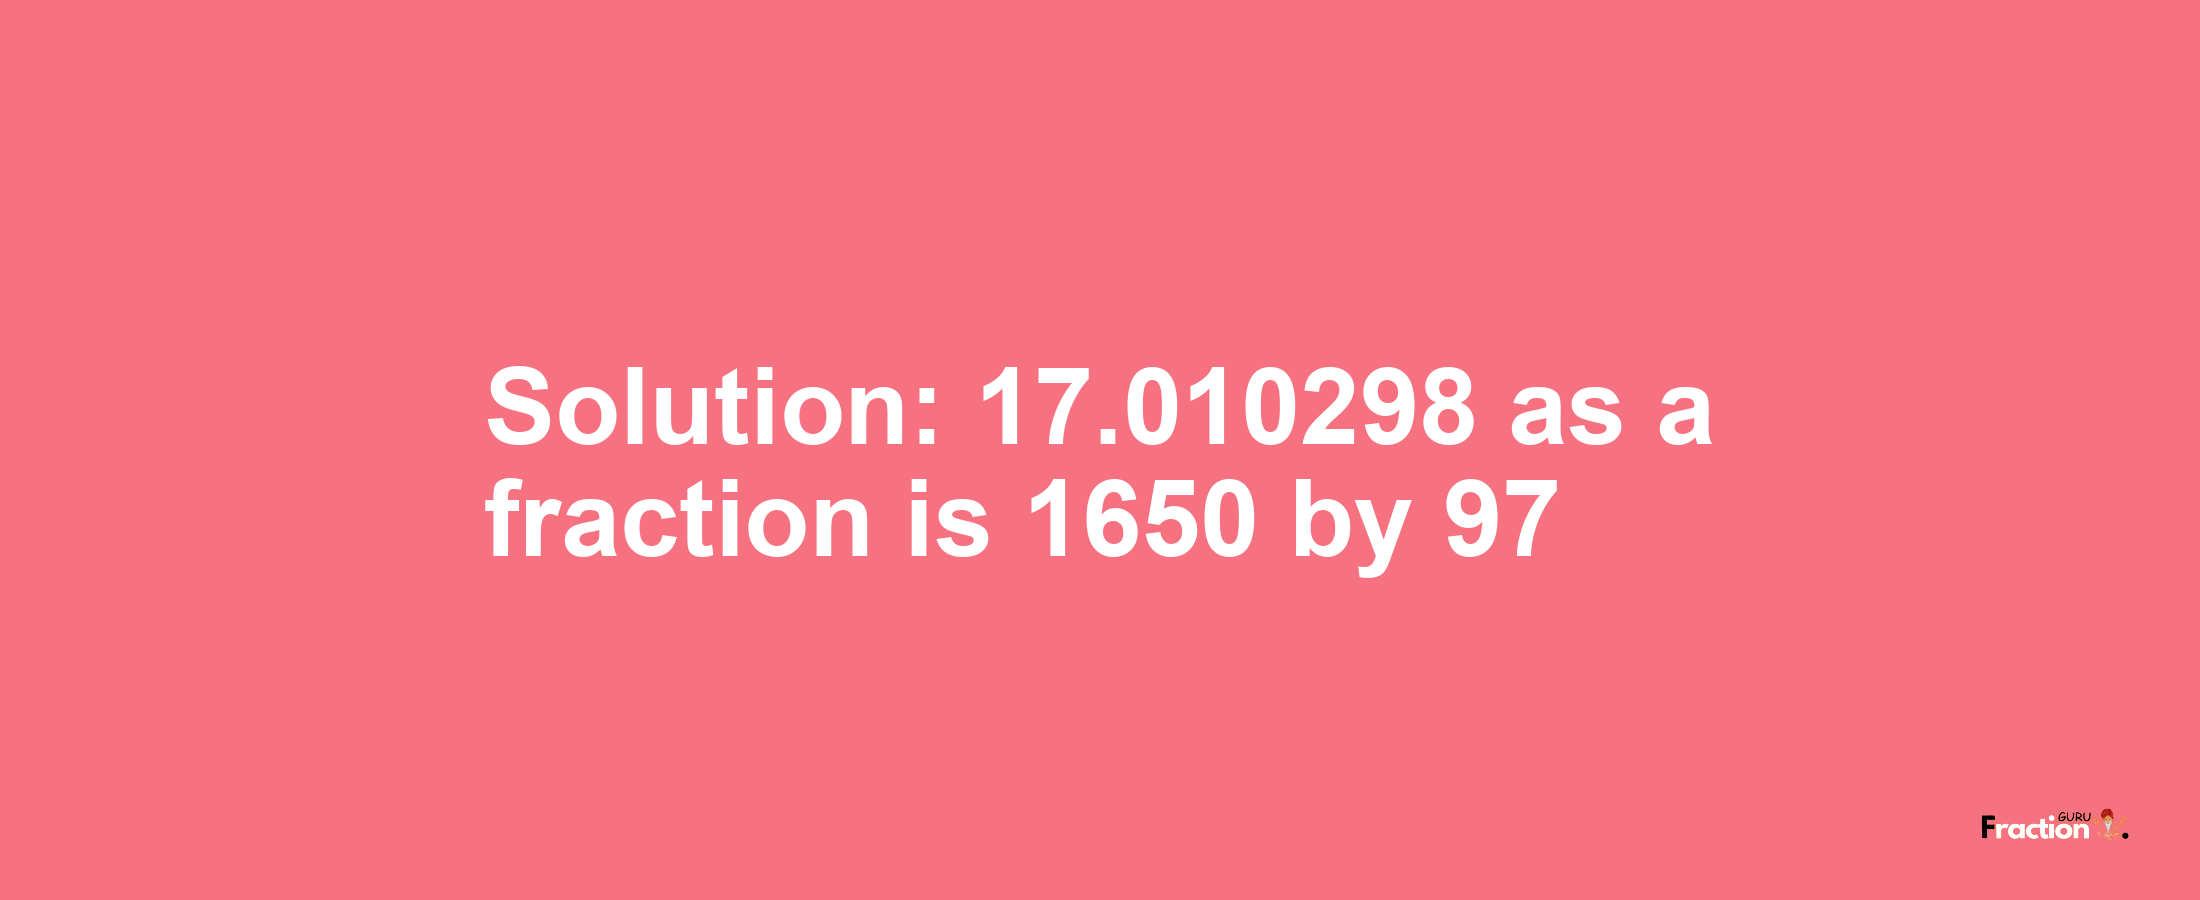 Solution:17.010298 as a fraction is 1650/97